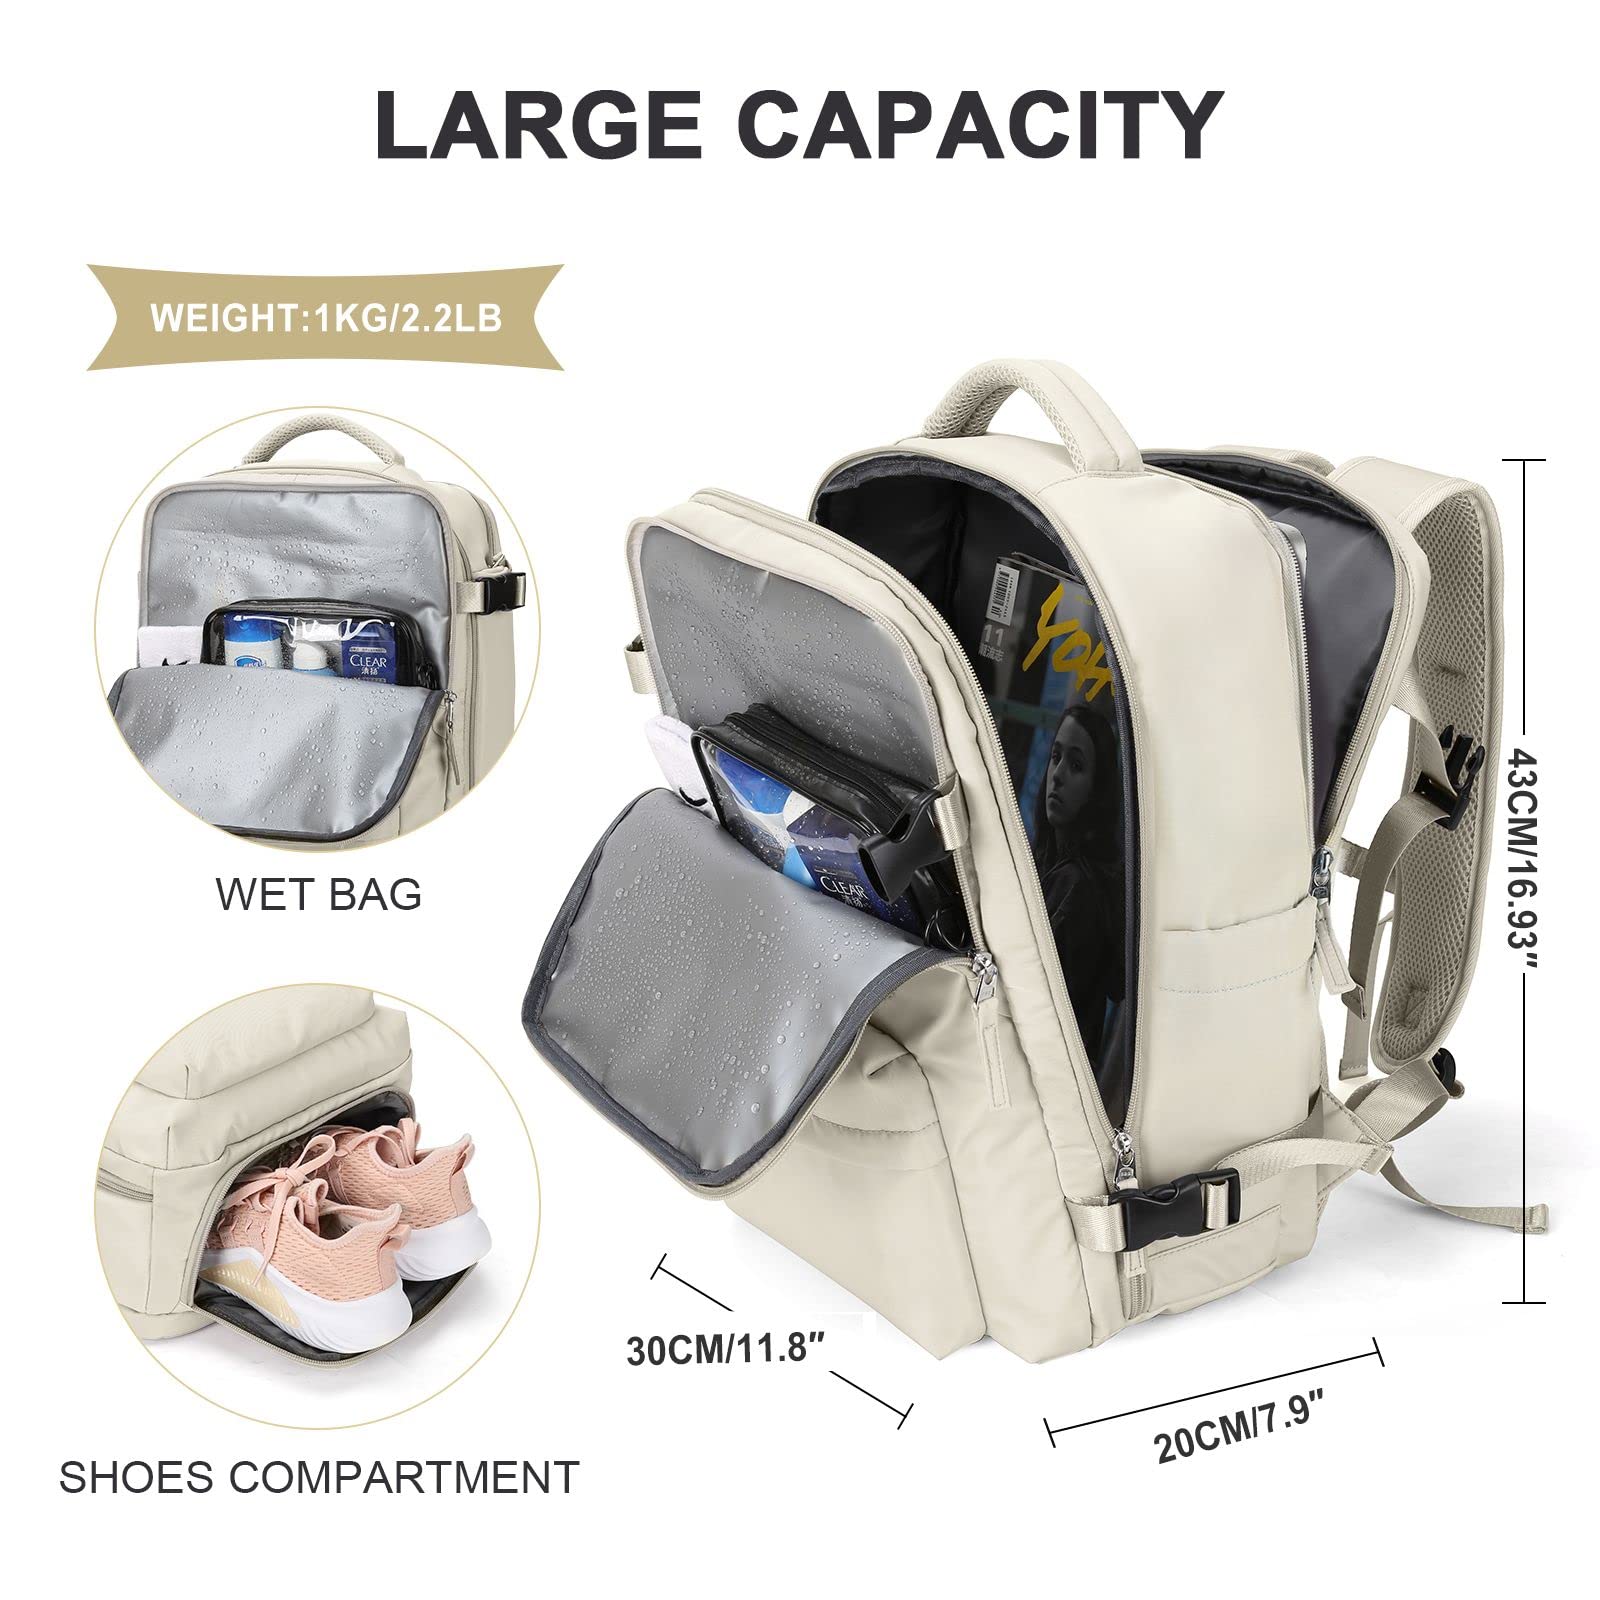 Large Travel Backpack Women, Carry On Backpack,Hiking Backpack Waterproof Outdoor Sports Rucksack Casual Daypack Fit 14 Inch Laptop with USB Charging Port Shoes Compartment, Beige